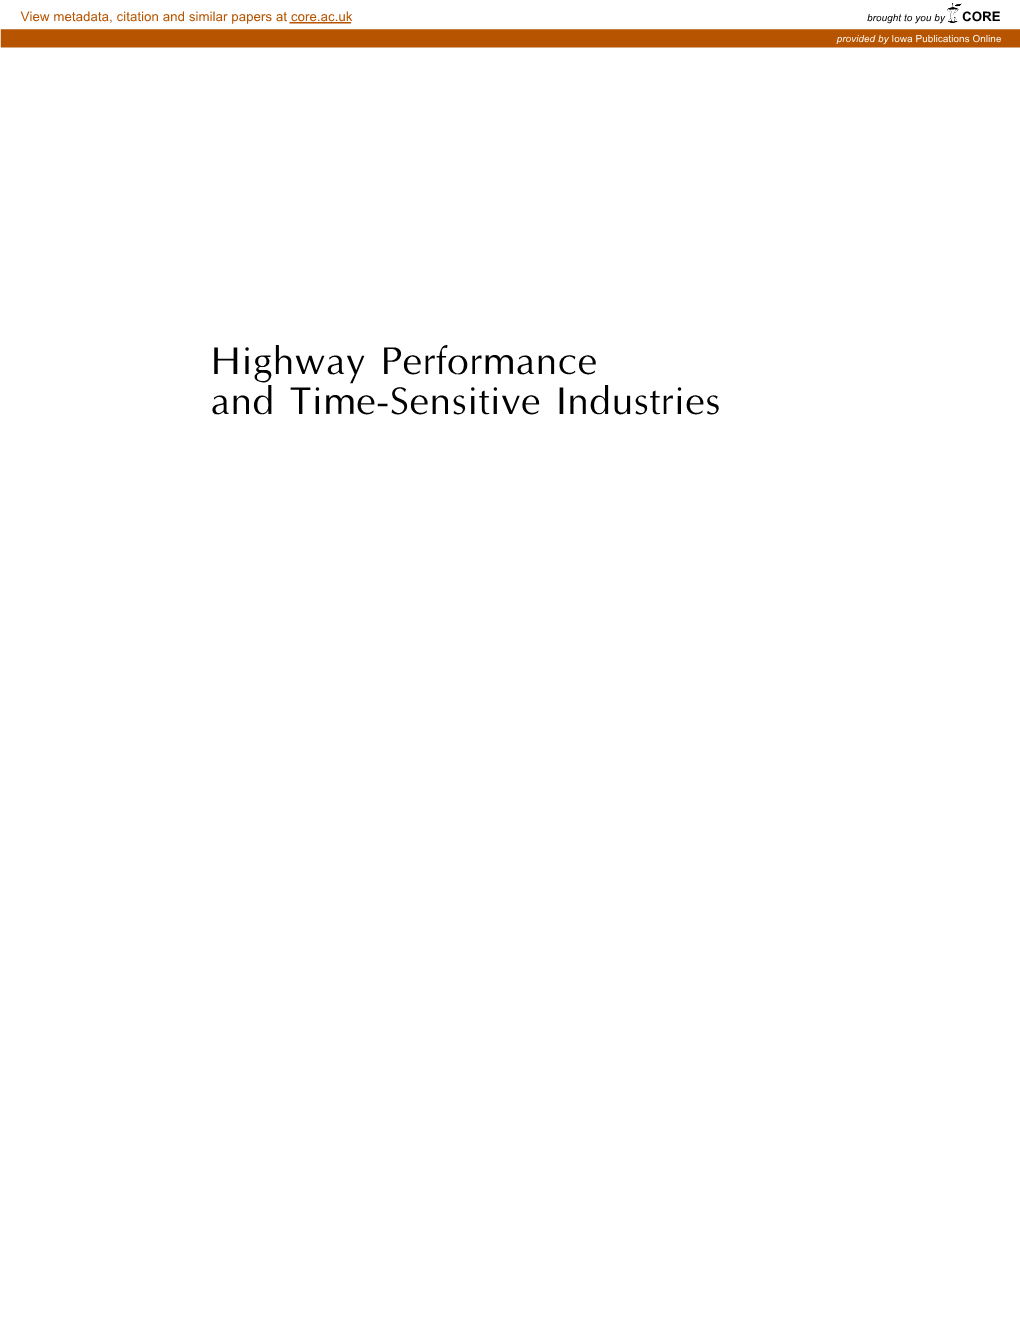 Highway Performance and Time-Sensitive Industries